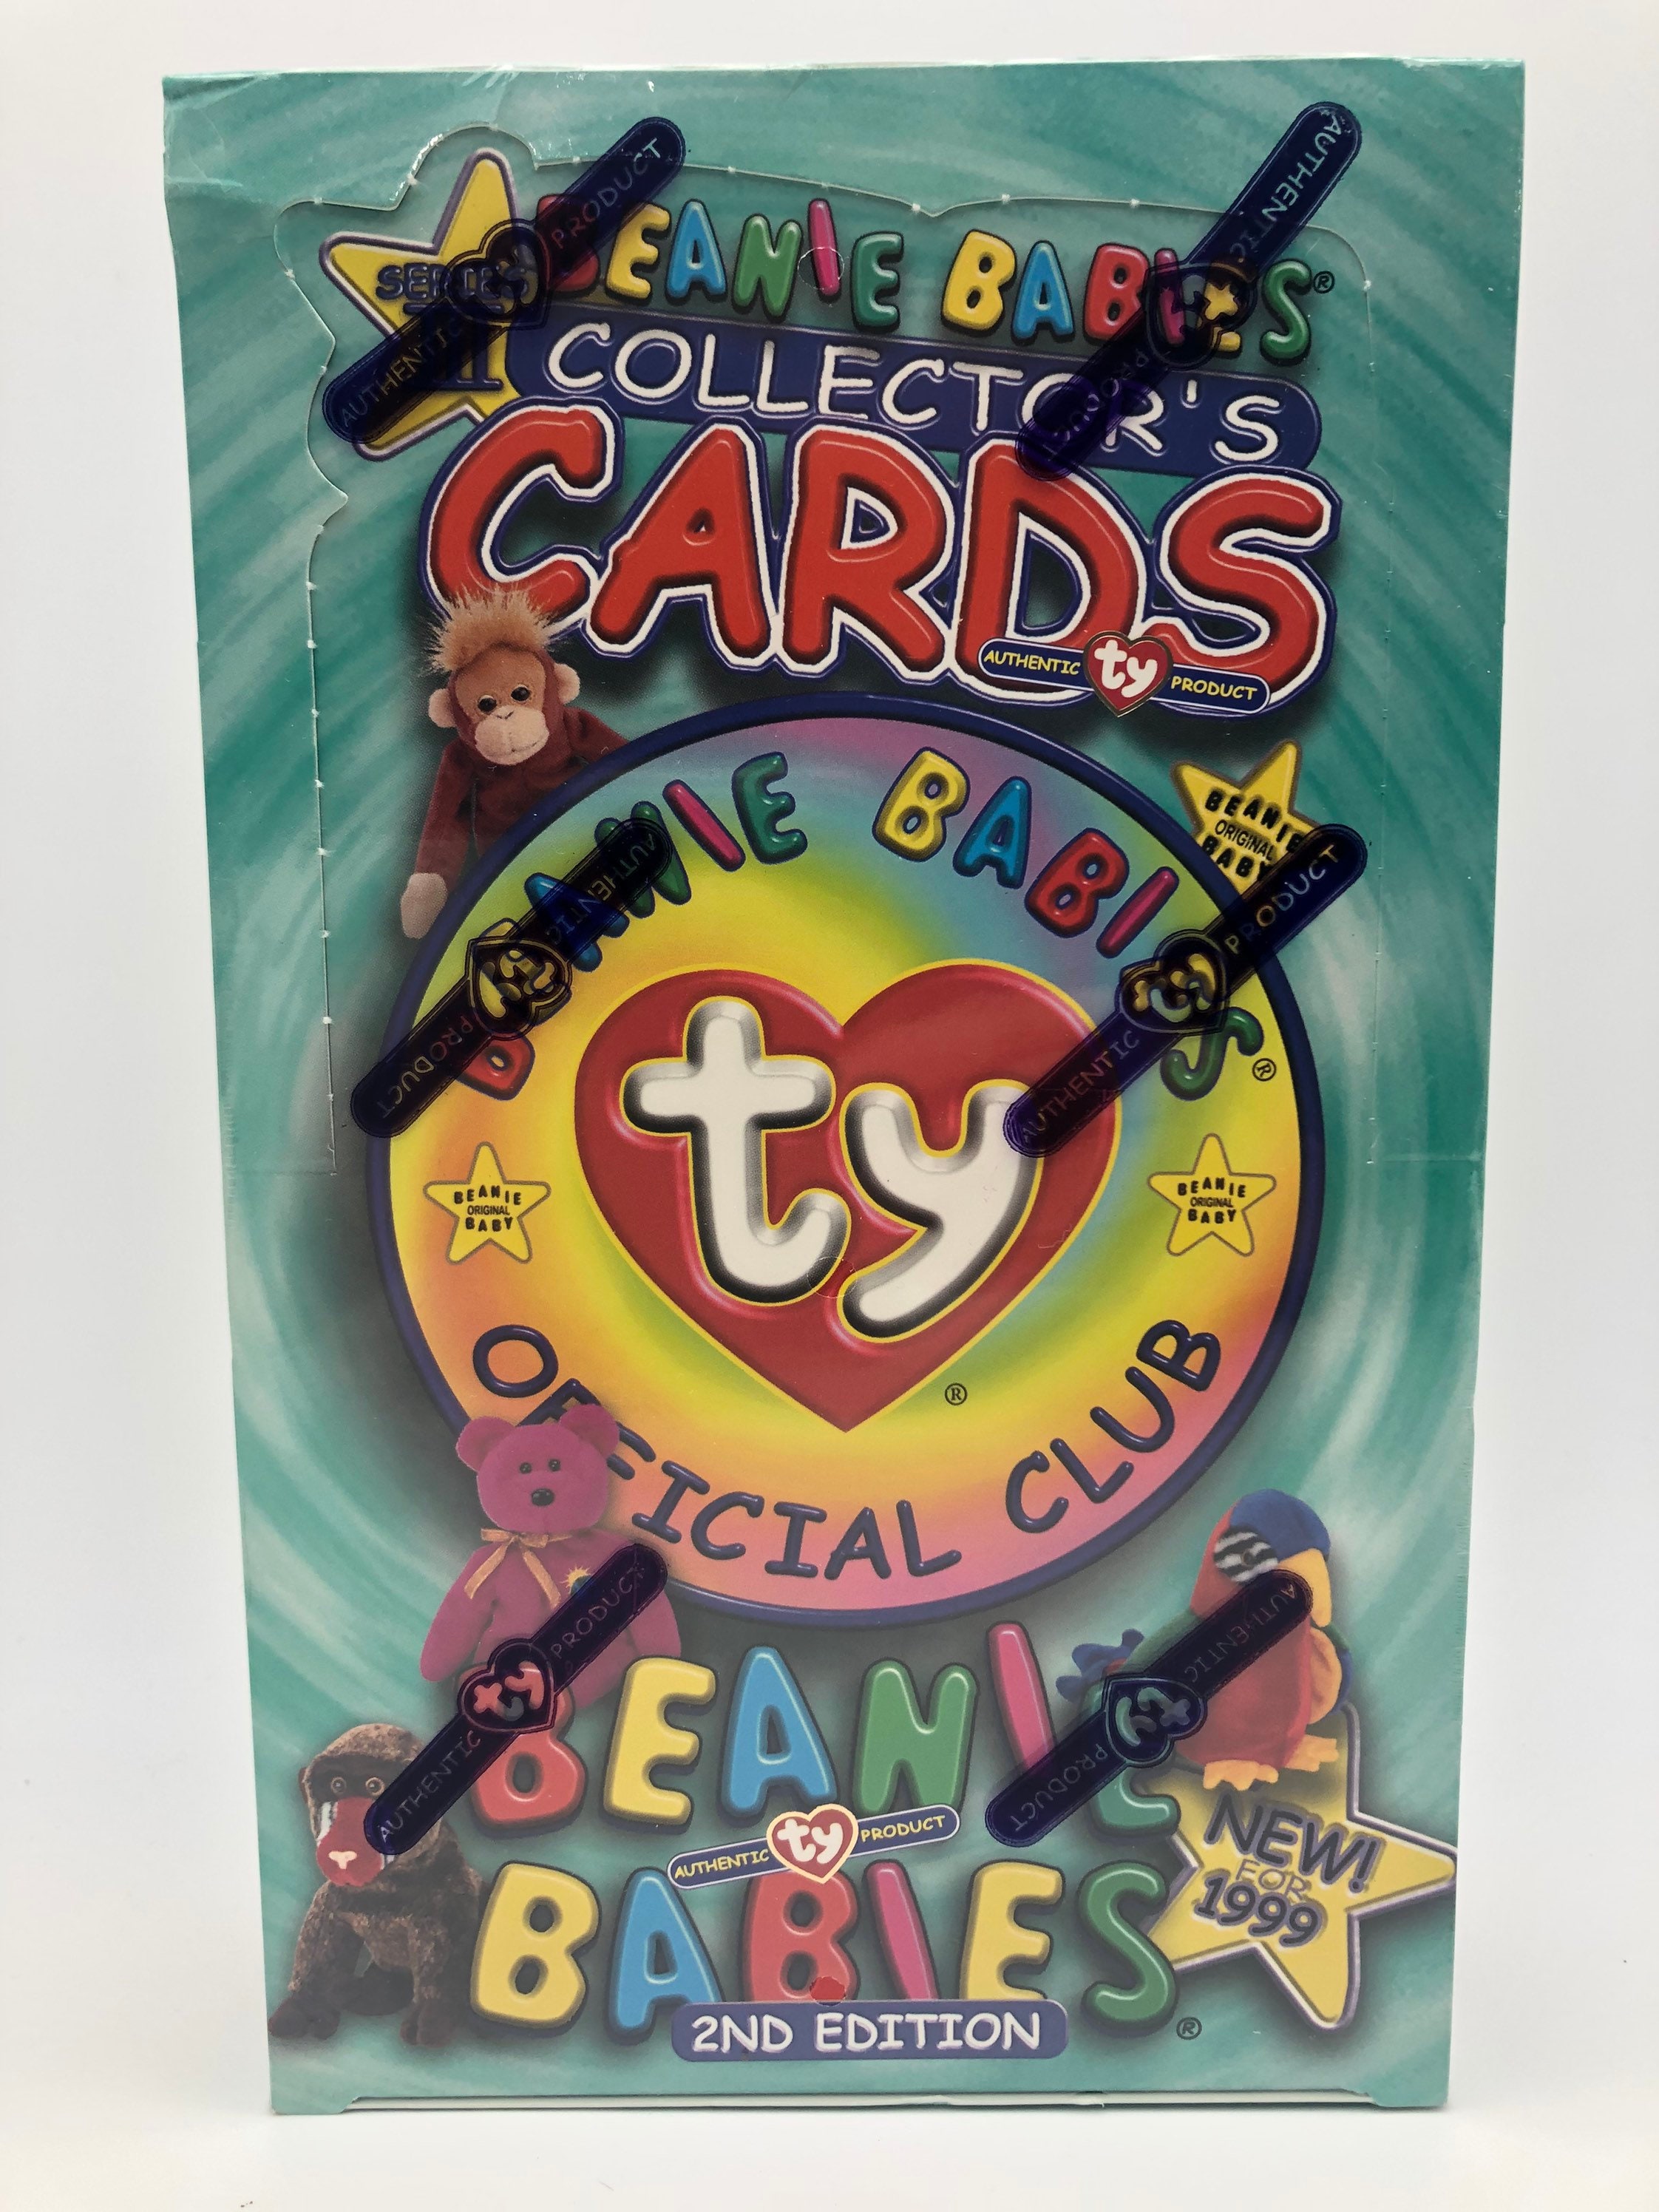 TY BEANIE BABIES 1st Edition Series 2 Collectors Cards Factory Sealed BOX 